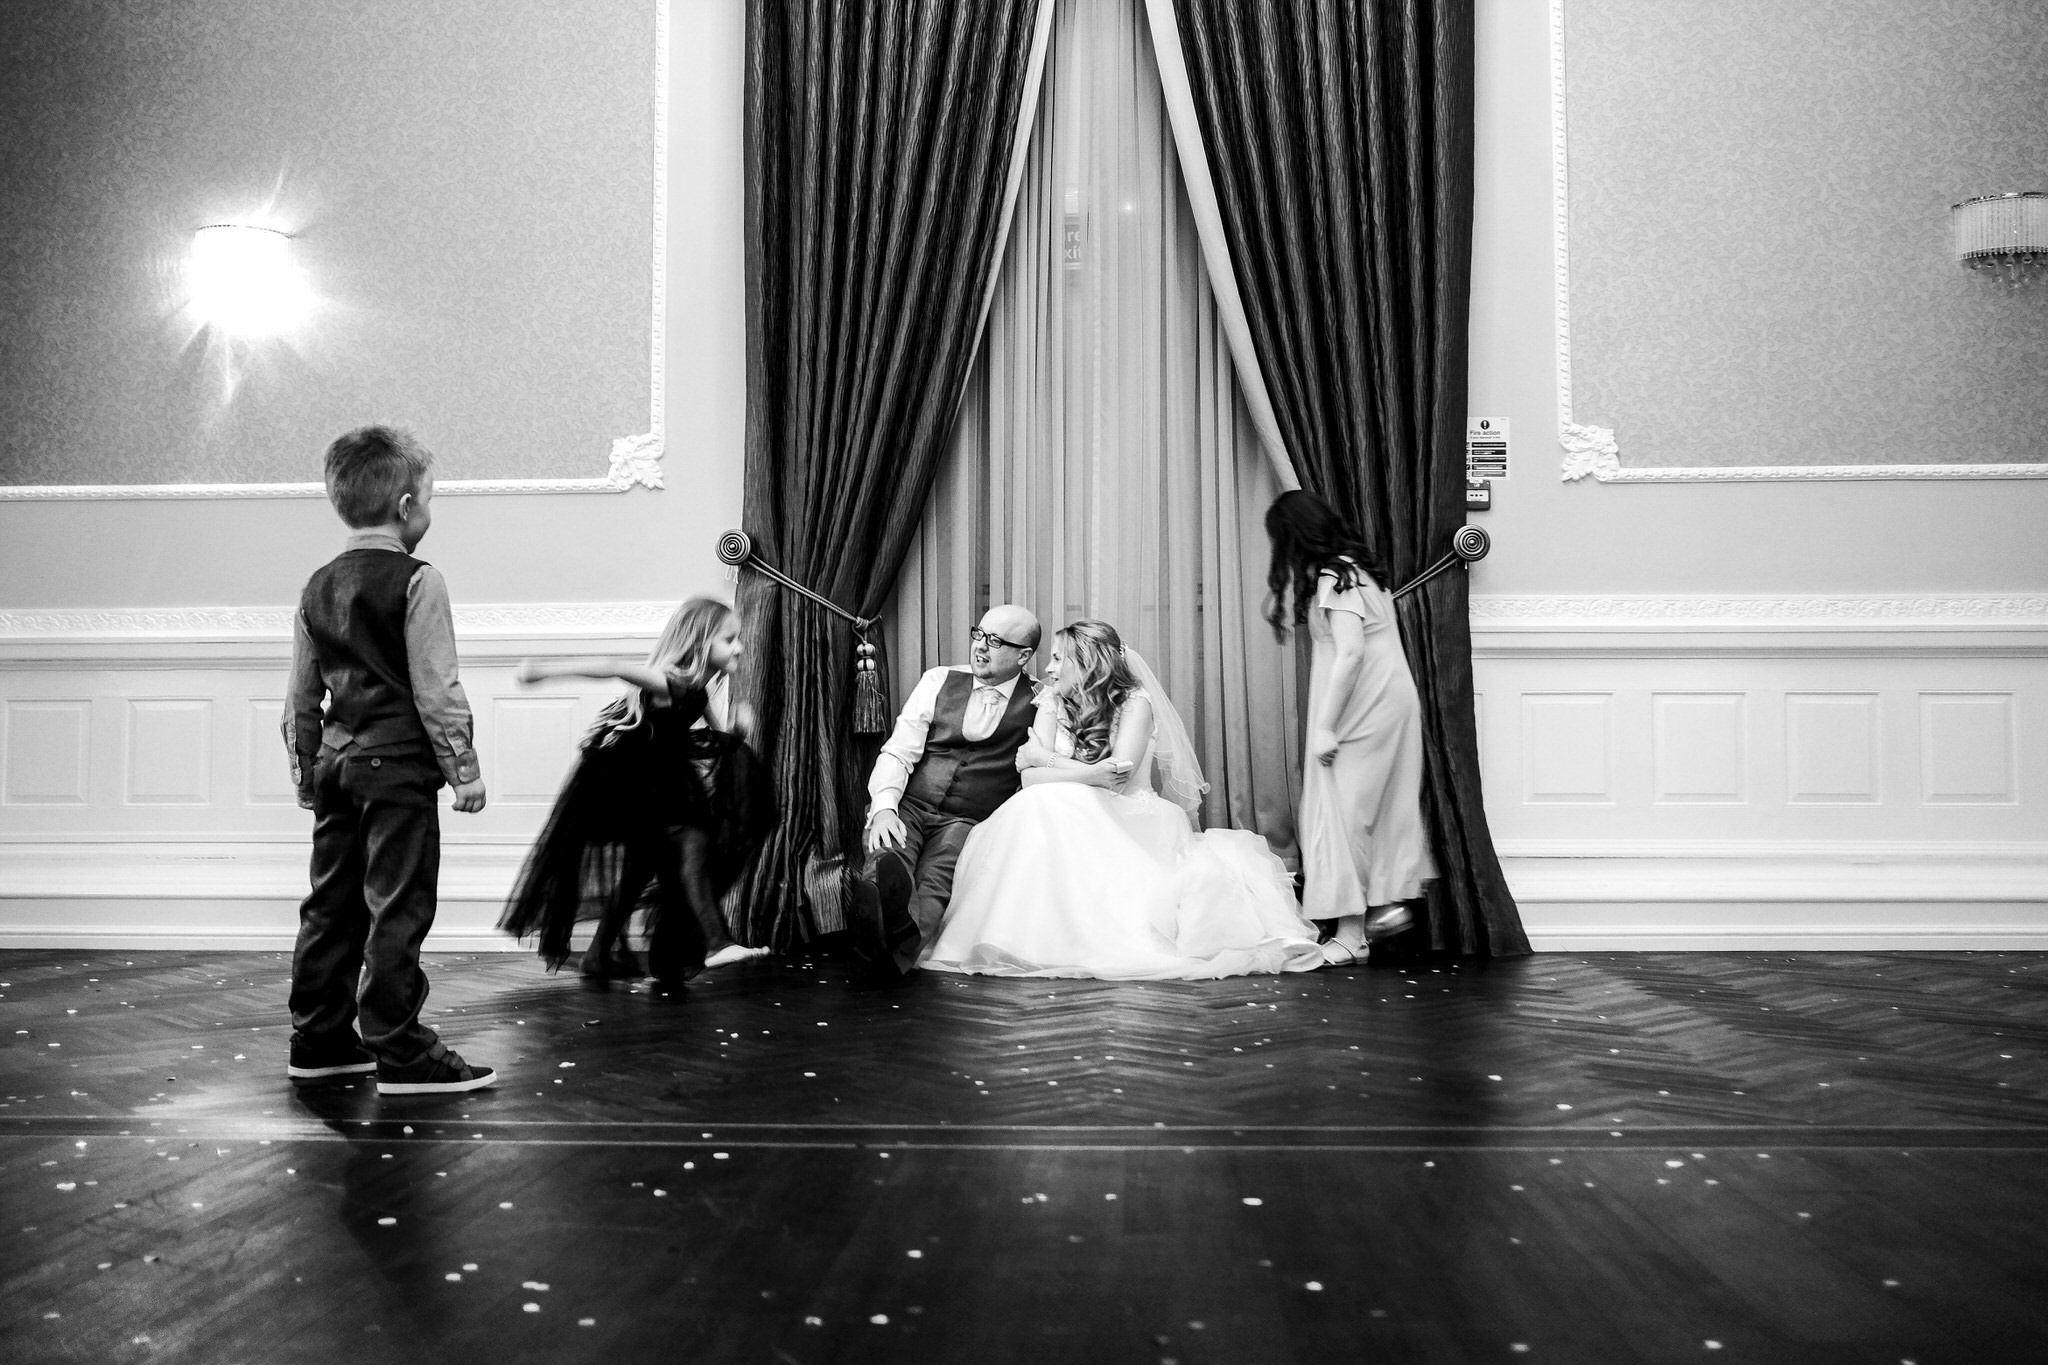 Children surround the bride and groom - Authentic Wedding photography.jpg